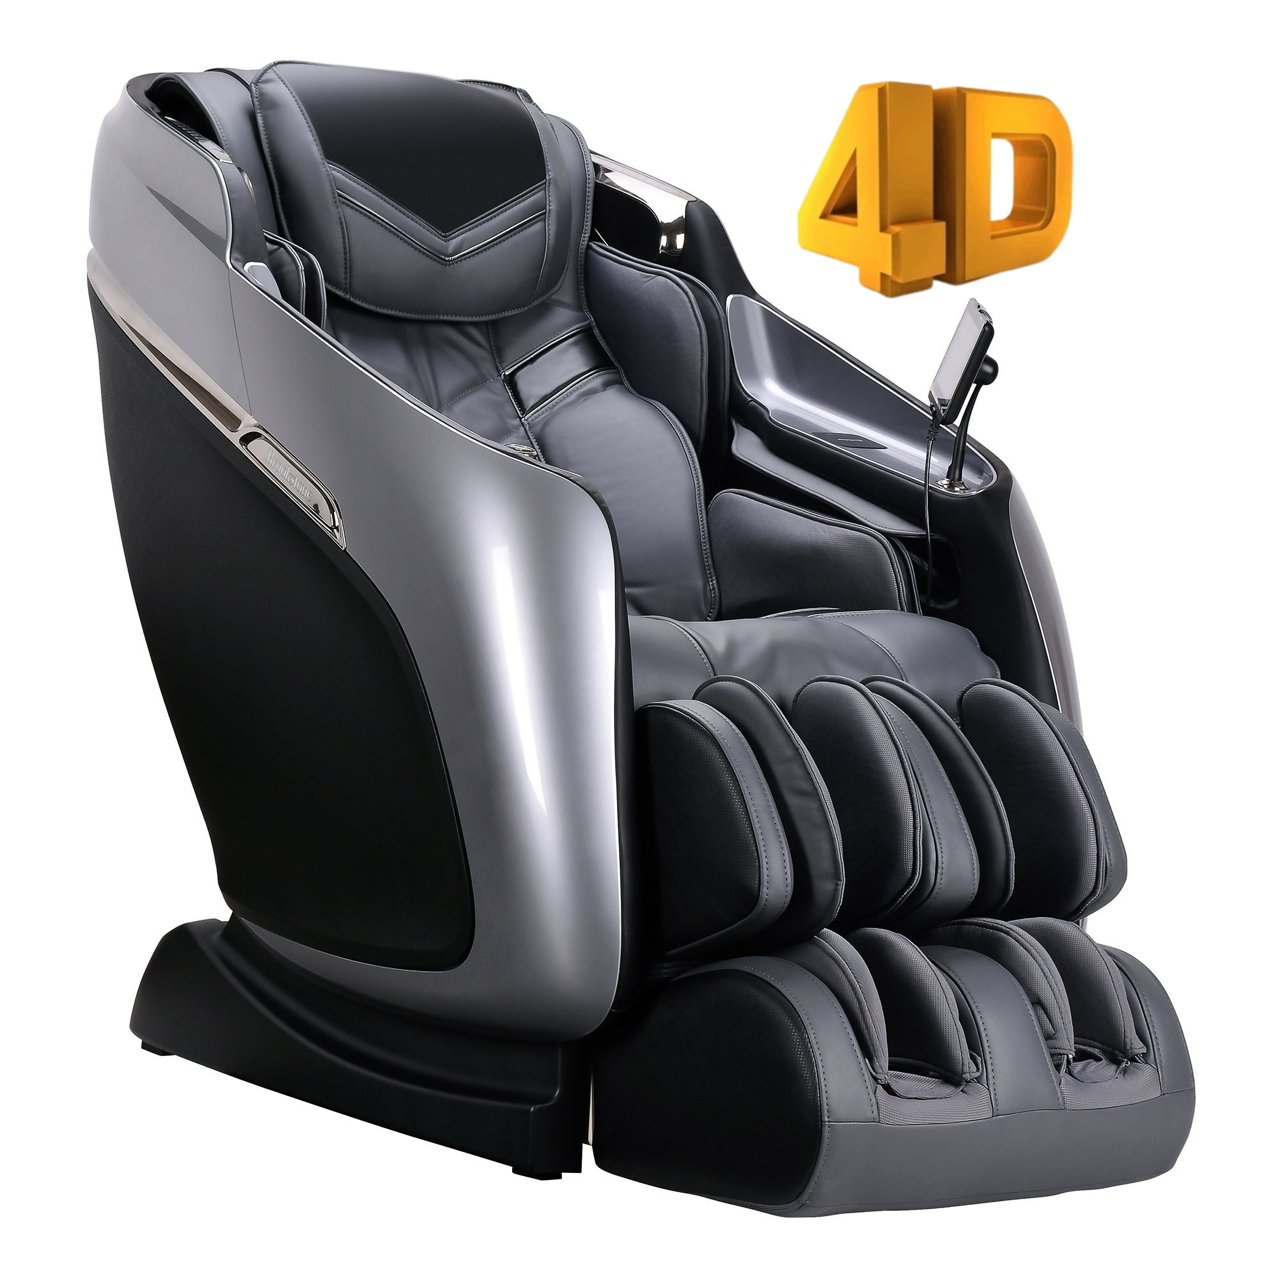 4D Massage Chairs - Relaxacare